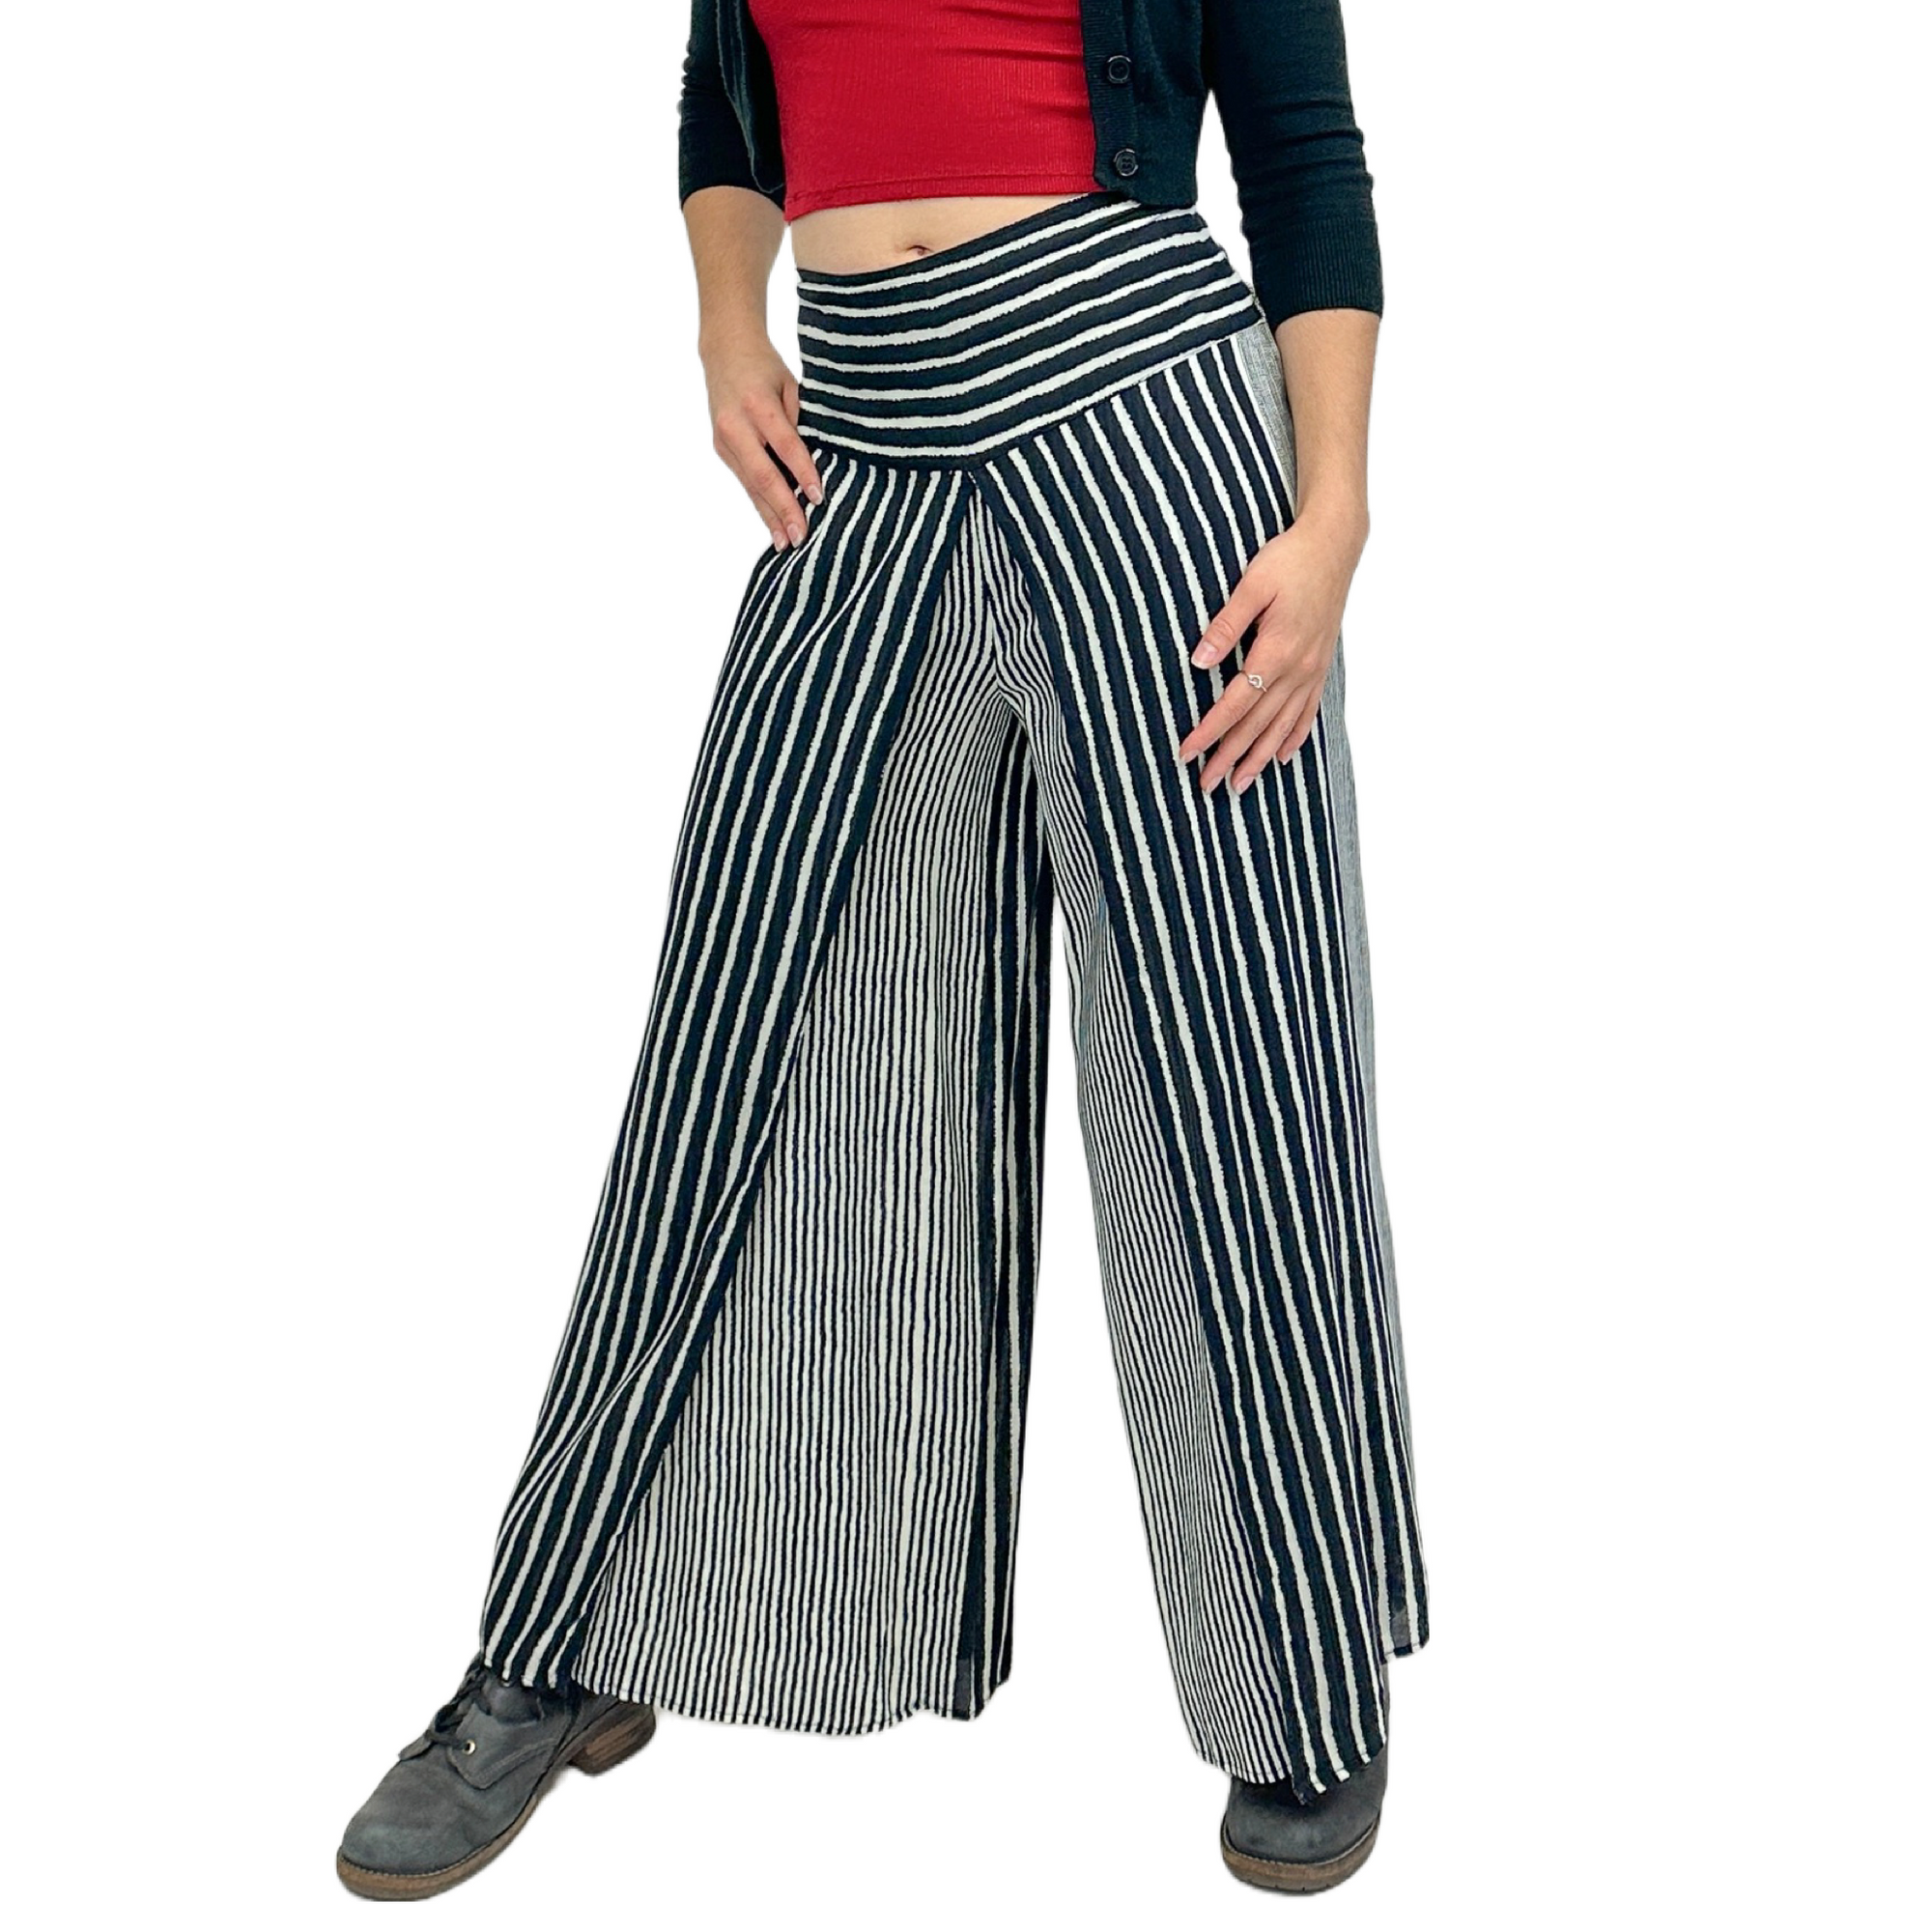 black and white beach pants for women | best price for rayon and linen pants USD | ideal for hot summer days! | no pockets - wrap style design 